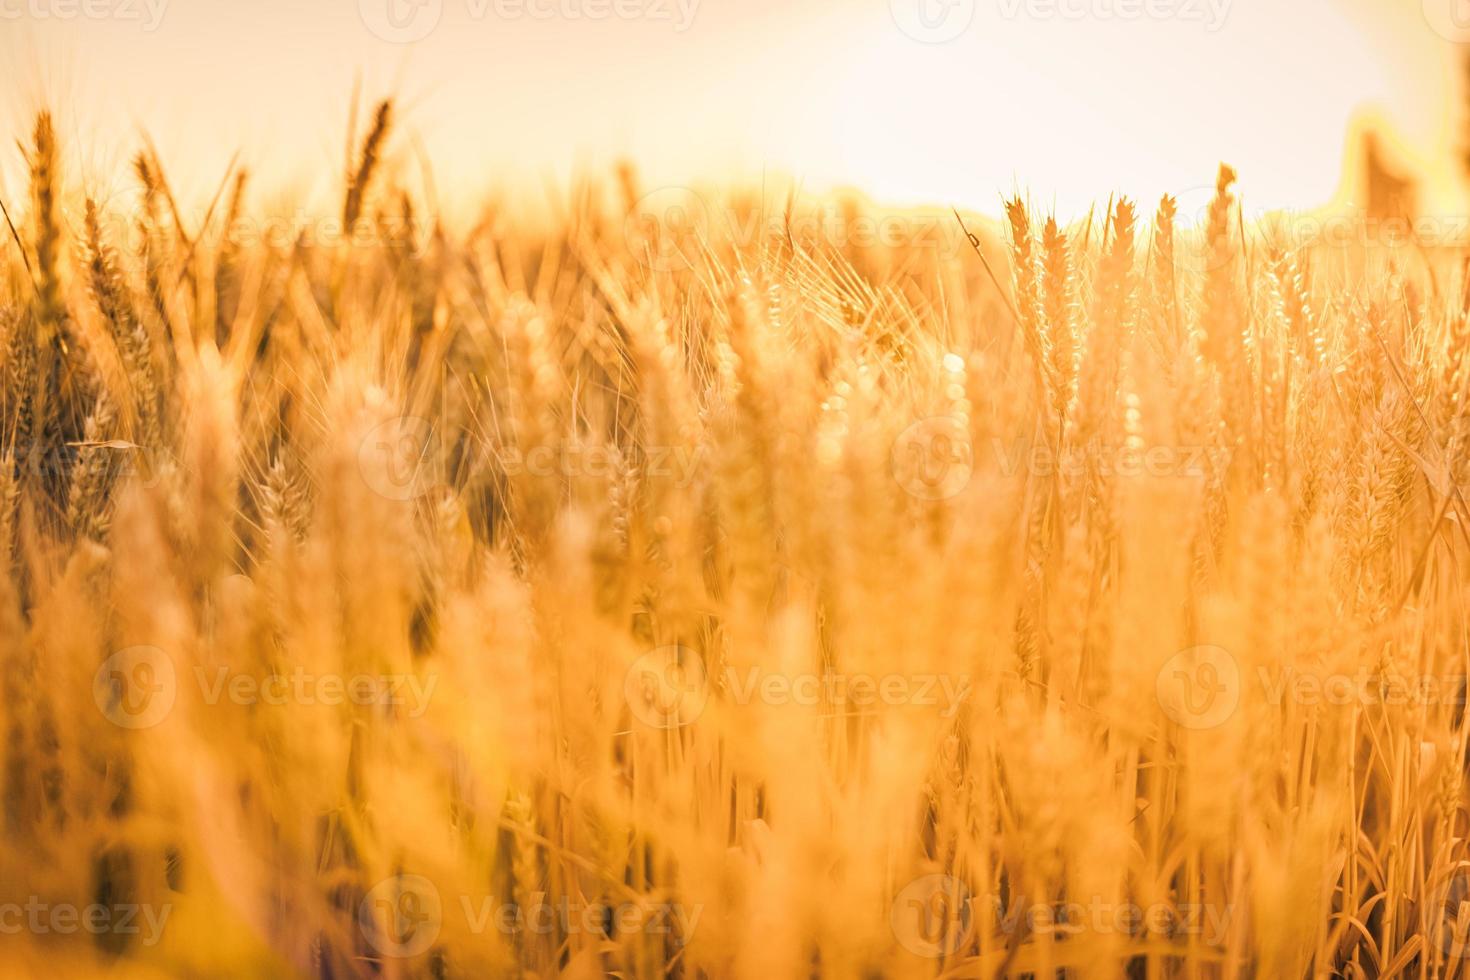 Wheat field sunset. Ears of golden wheat closeup. Rural scenery under shining sunlight. Close-up of ripe golden wheat, blurred golden Harvest time concept. Nature agriculture, sun rays bright farming photo